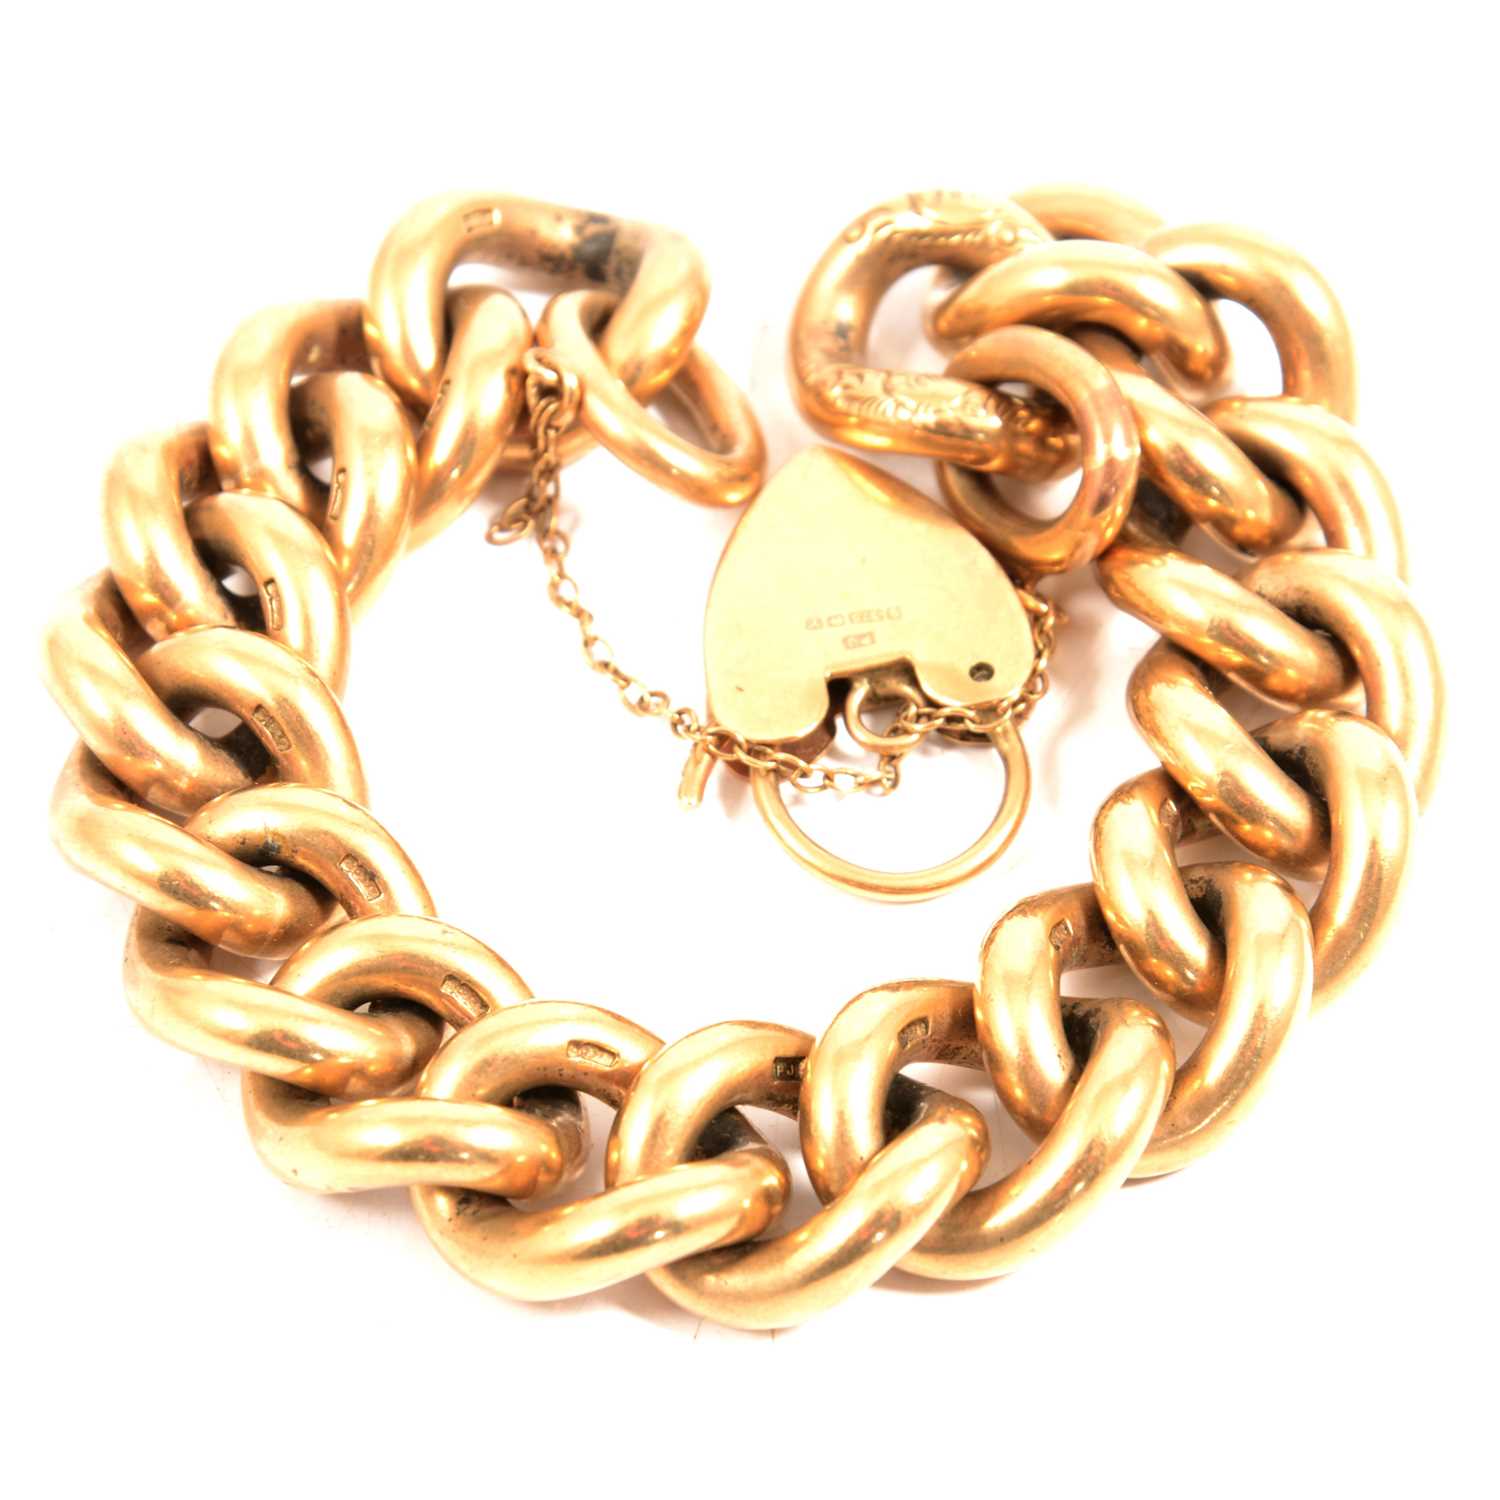 A 9 carat yellow gold solid curb link bracelet.